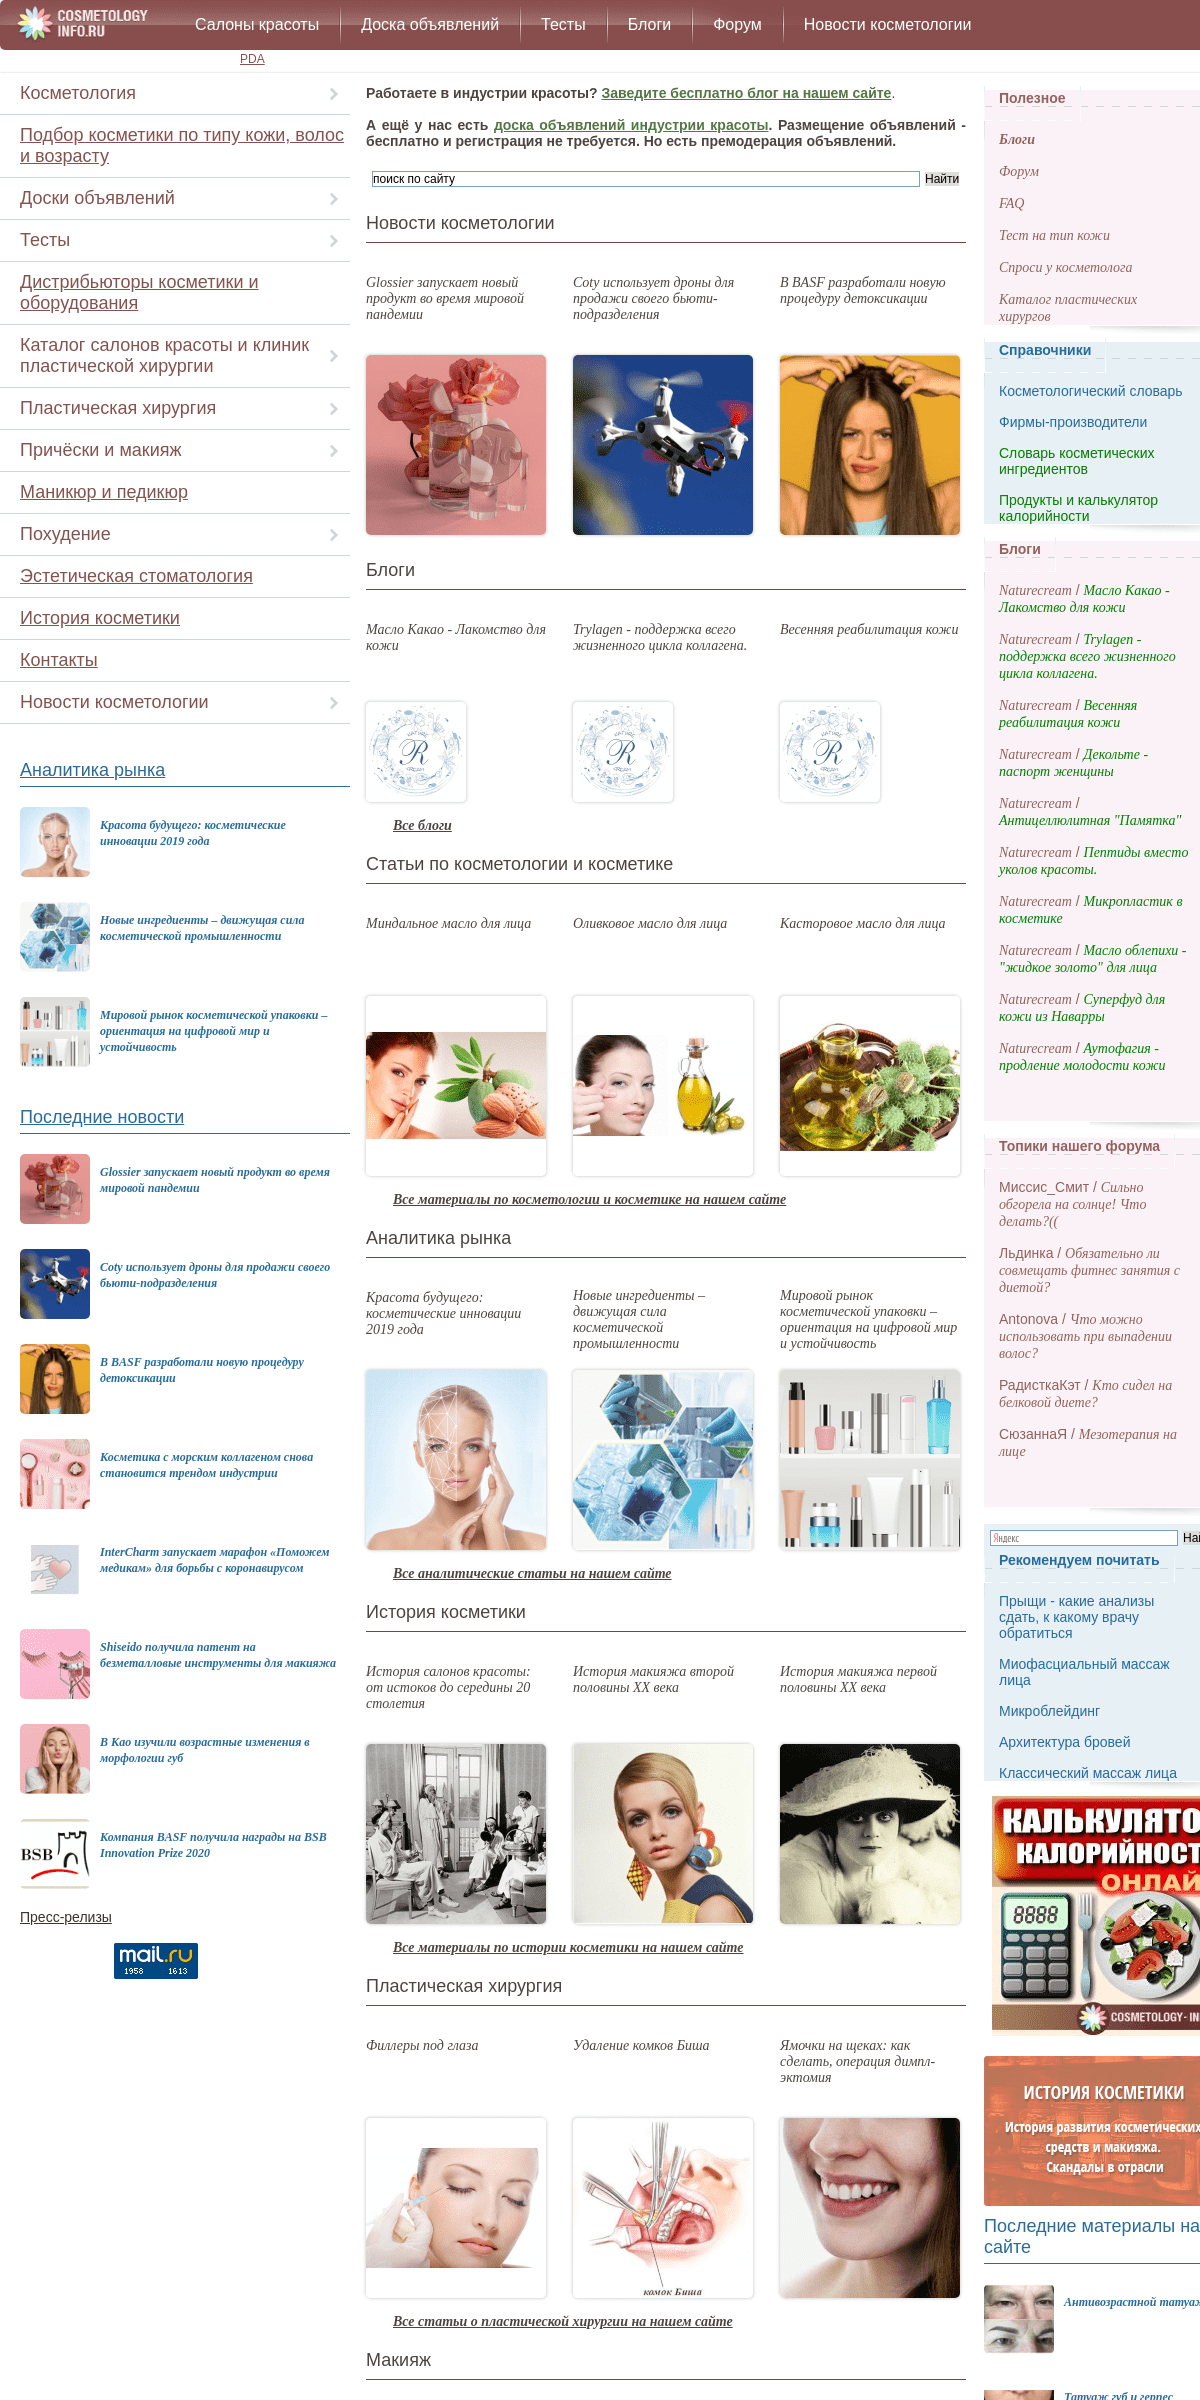 A complete backup of cosmetology-info.ru